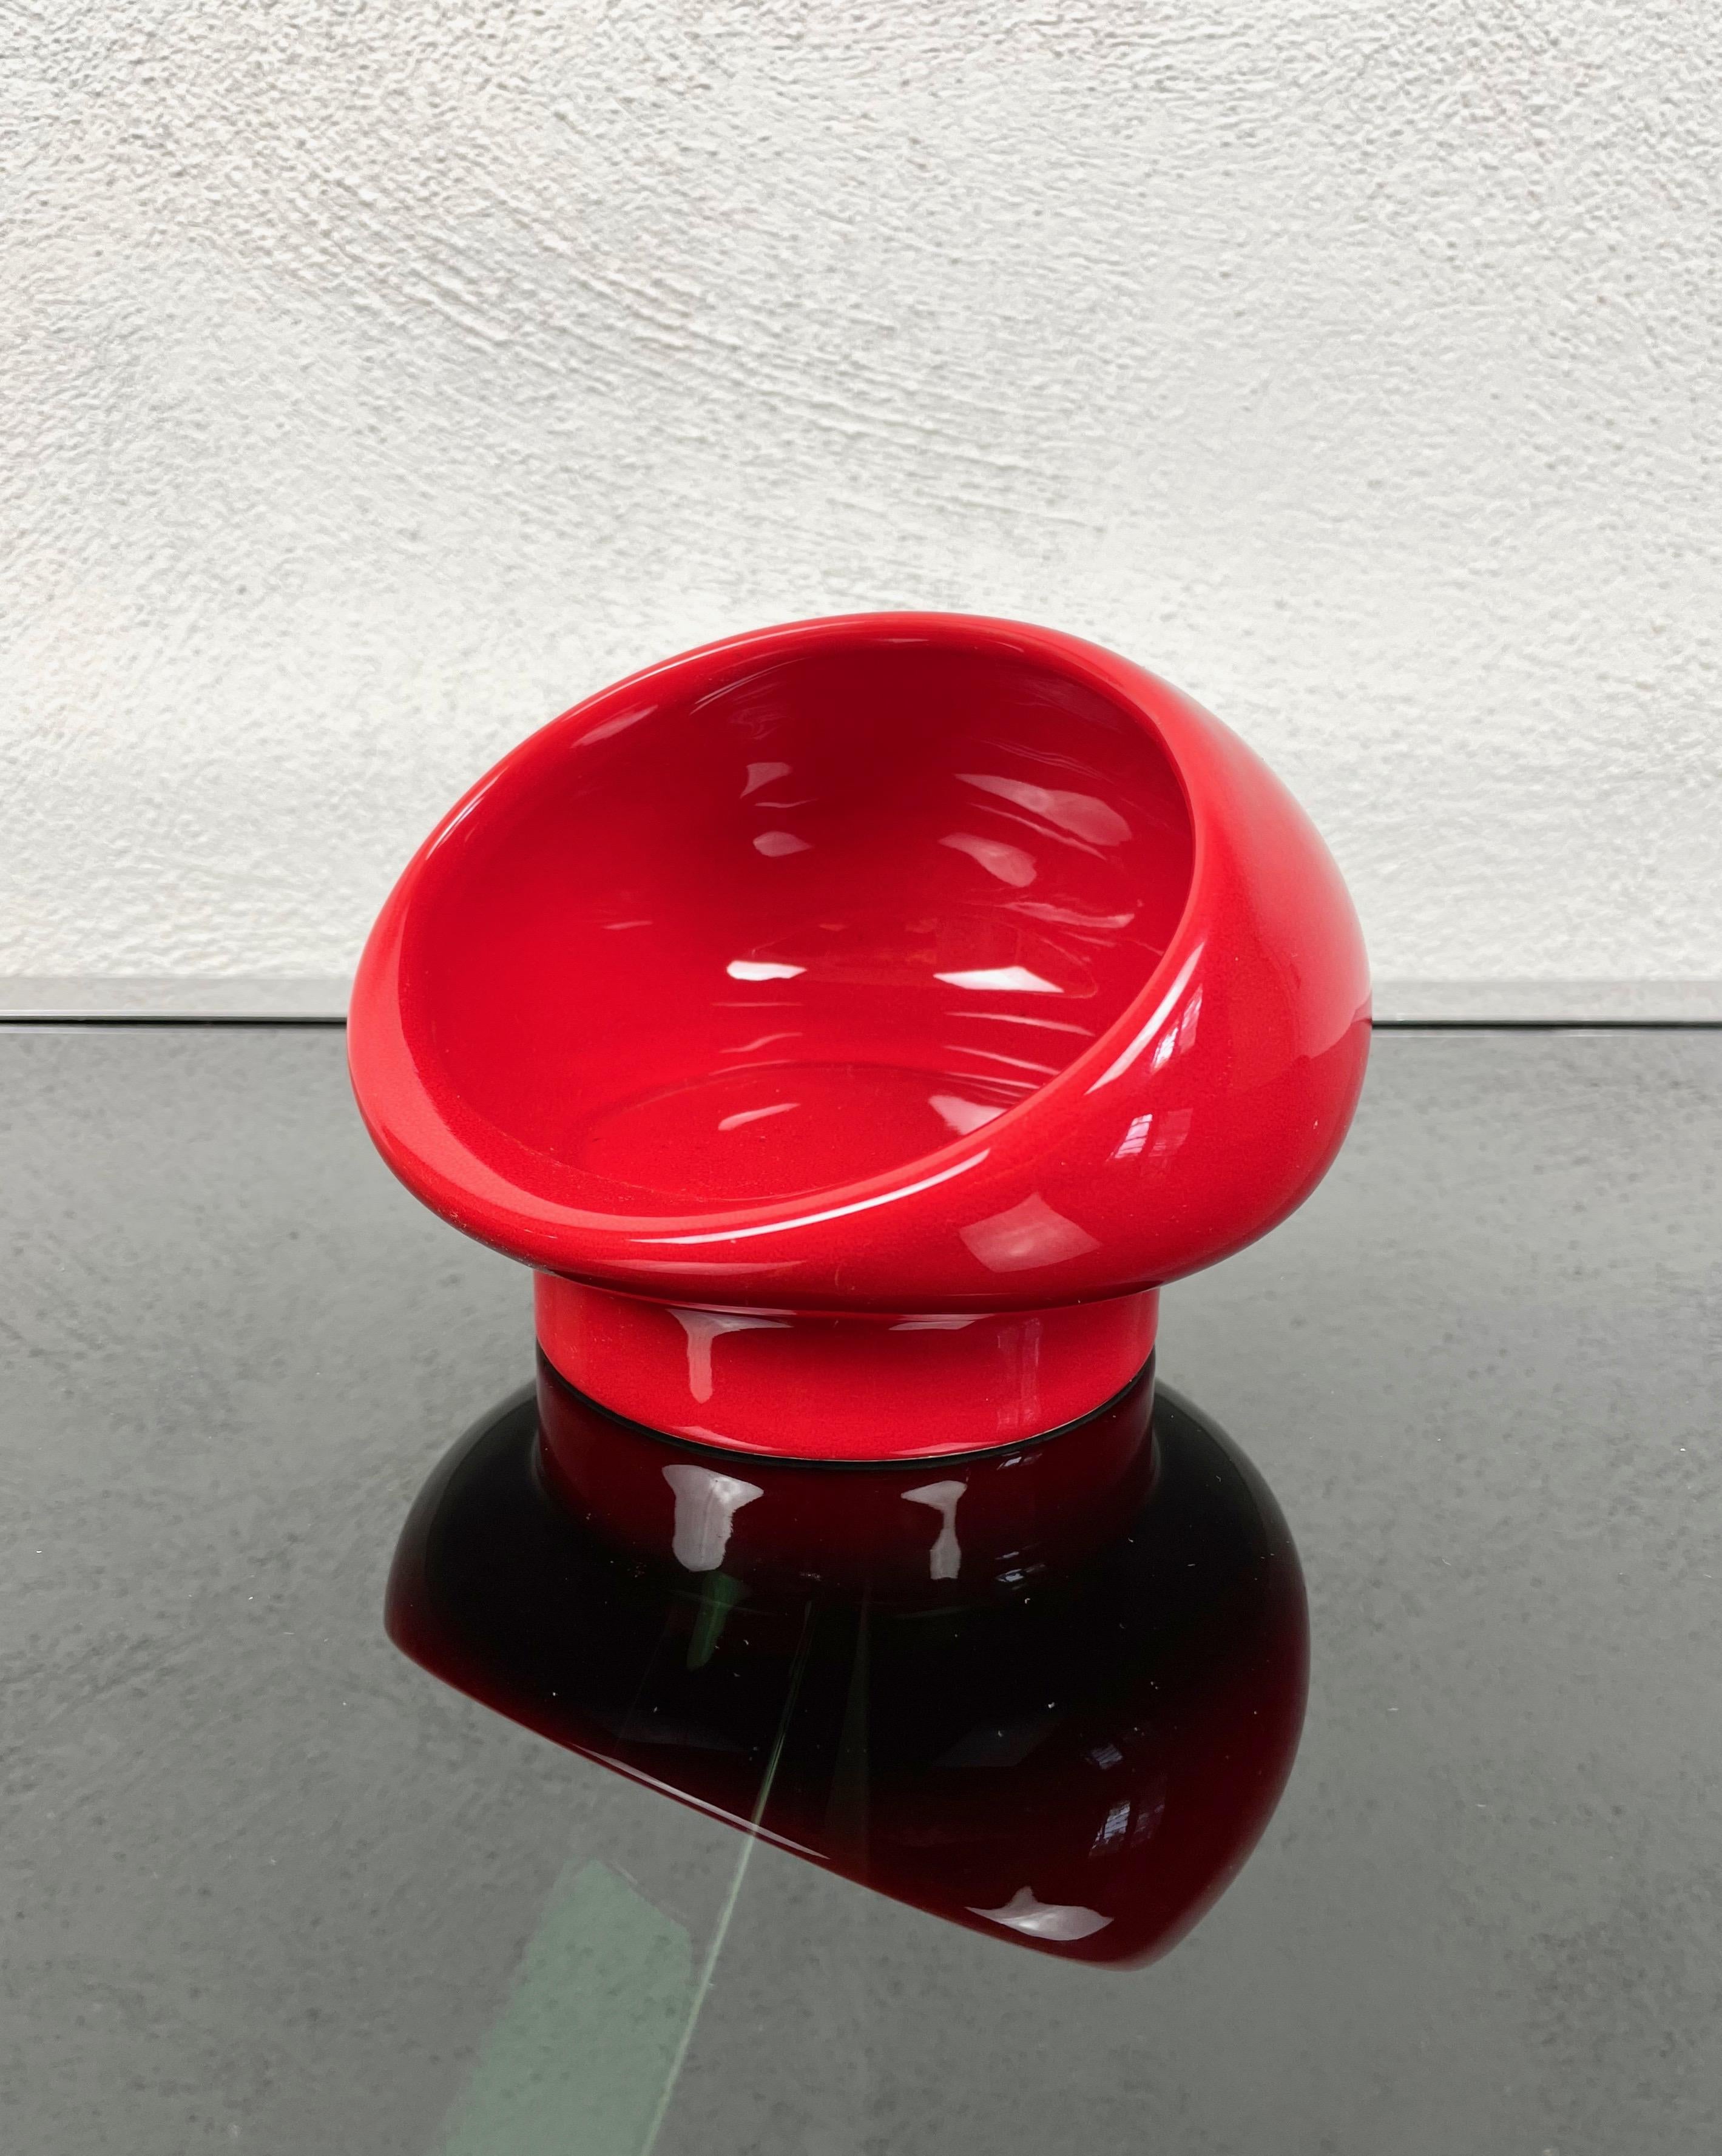 Space Age ashtray in red ceramic made by Studio OPI Gabbianelli in Italy in the 1970s. 
It comes with its original label still attached on the bottom, as shown in the photos.